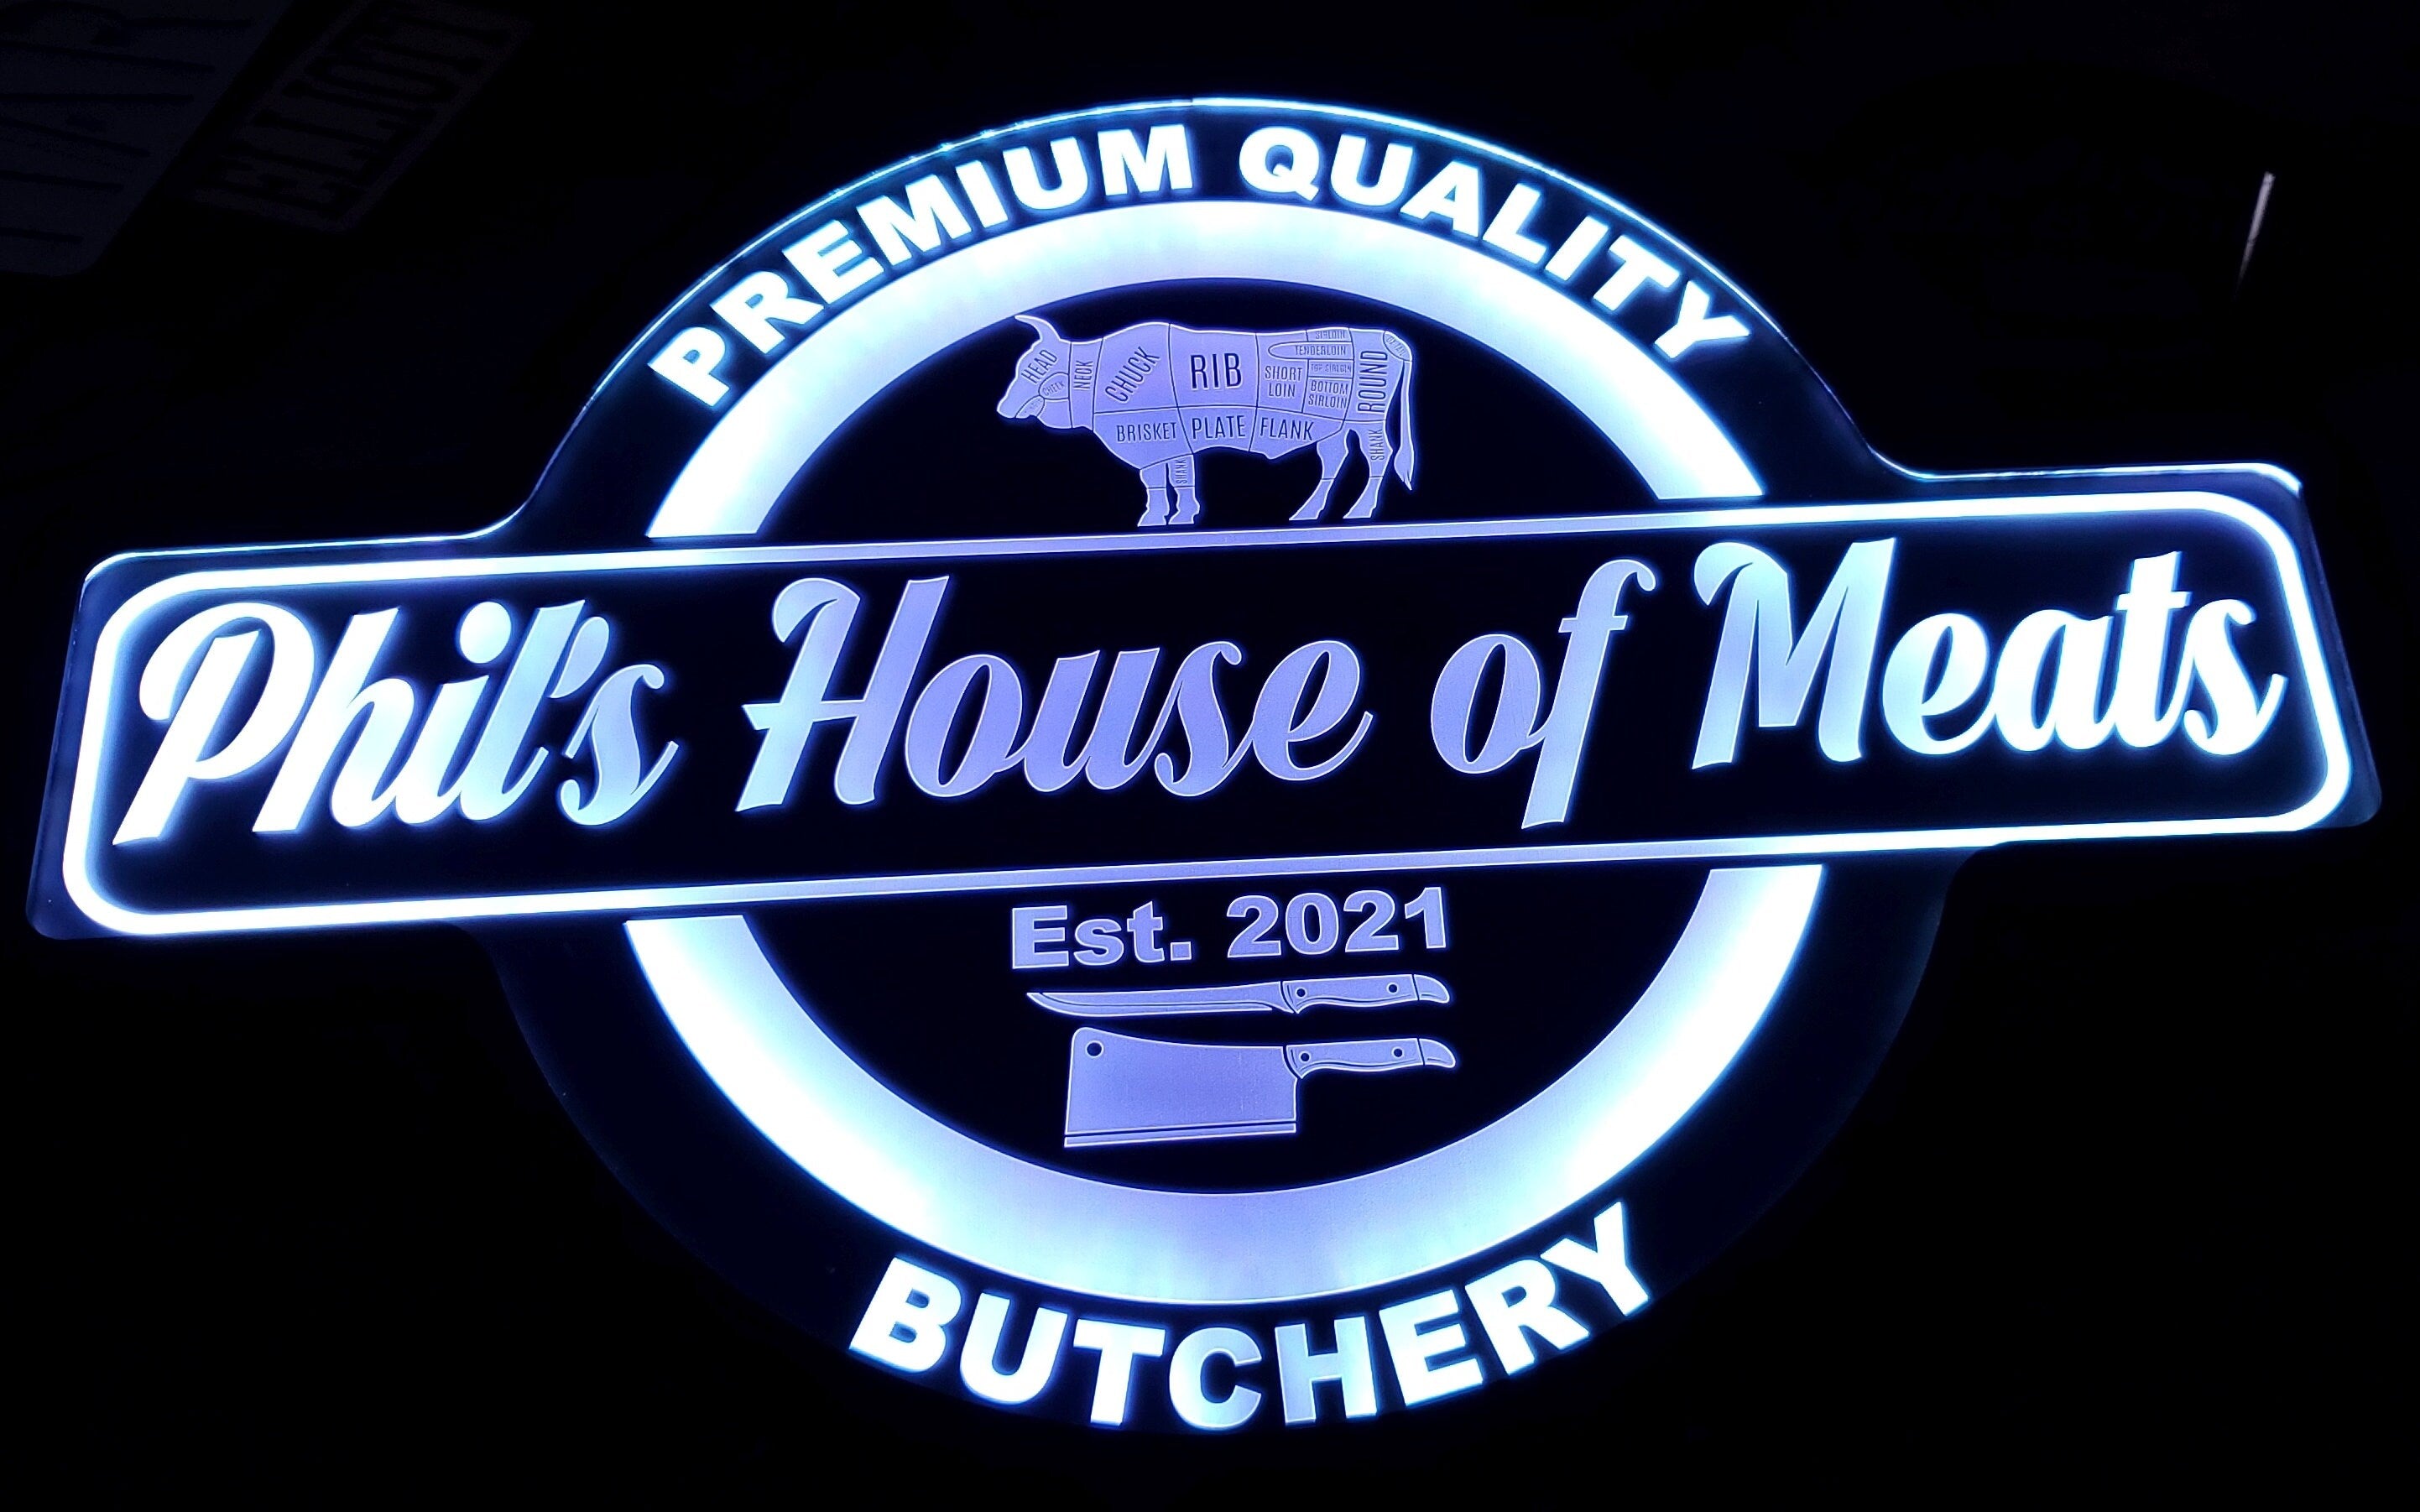 Custom Barbecue, Grill, BBQ or Smoke Led Wall Sign Neon Like - Color Changing Remote Control - 4 Sizes Free Shipping